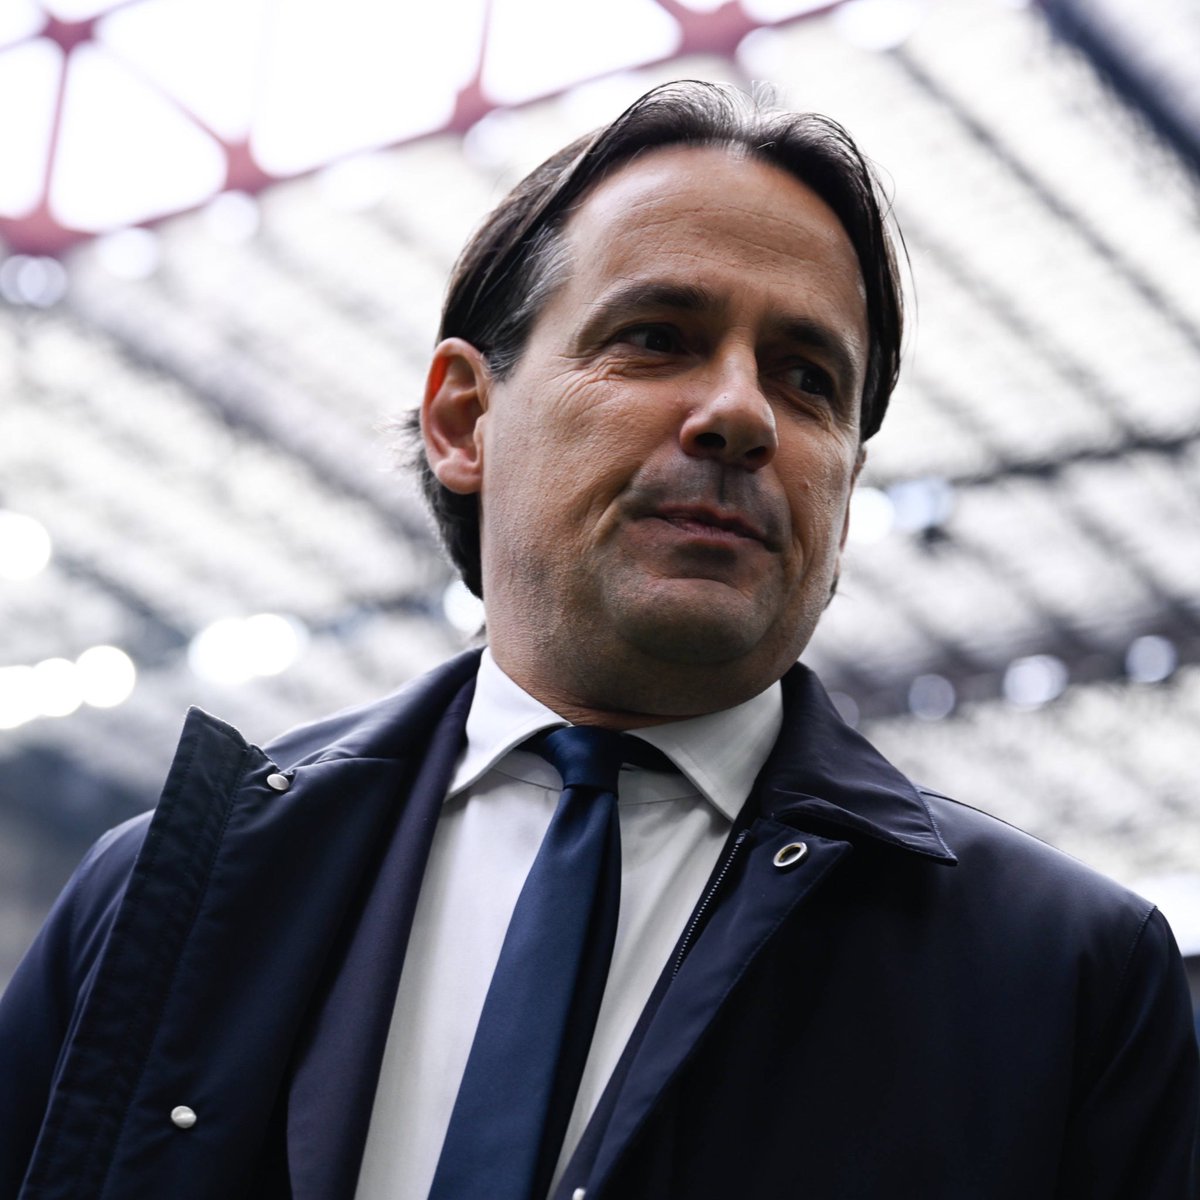 Inter have made a PROFIT of €197m in the Inzaghi-era 😱💸 Simone famously said in the past, “Wherever I go, revenues increase, losses decrease, and trophies arrive.” Obviously Marotta is the key for Inter’s recent business, but Simone sure knows how to raise the value of his…